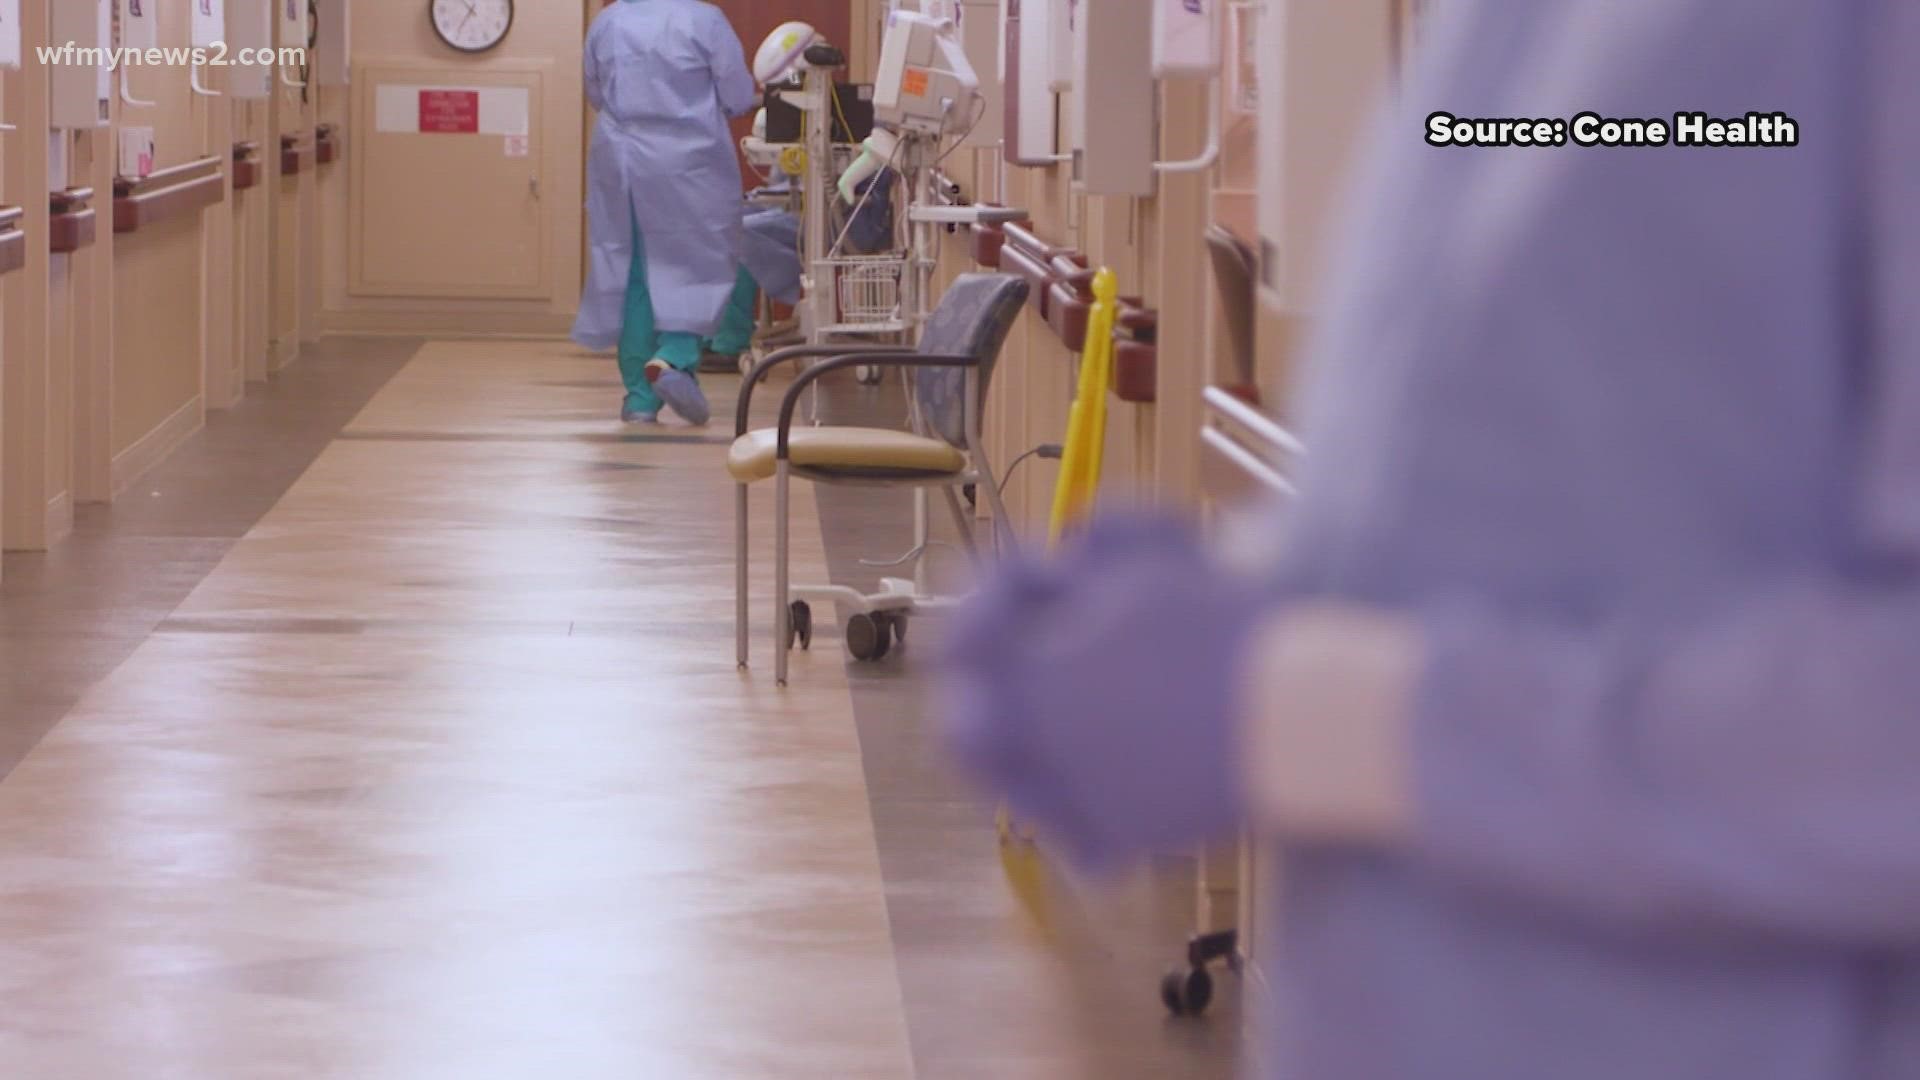 COVID-19 Hospitalizations are surging in the Triad, 2 healthcare workers said it's overwhelming.